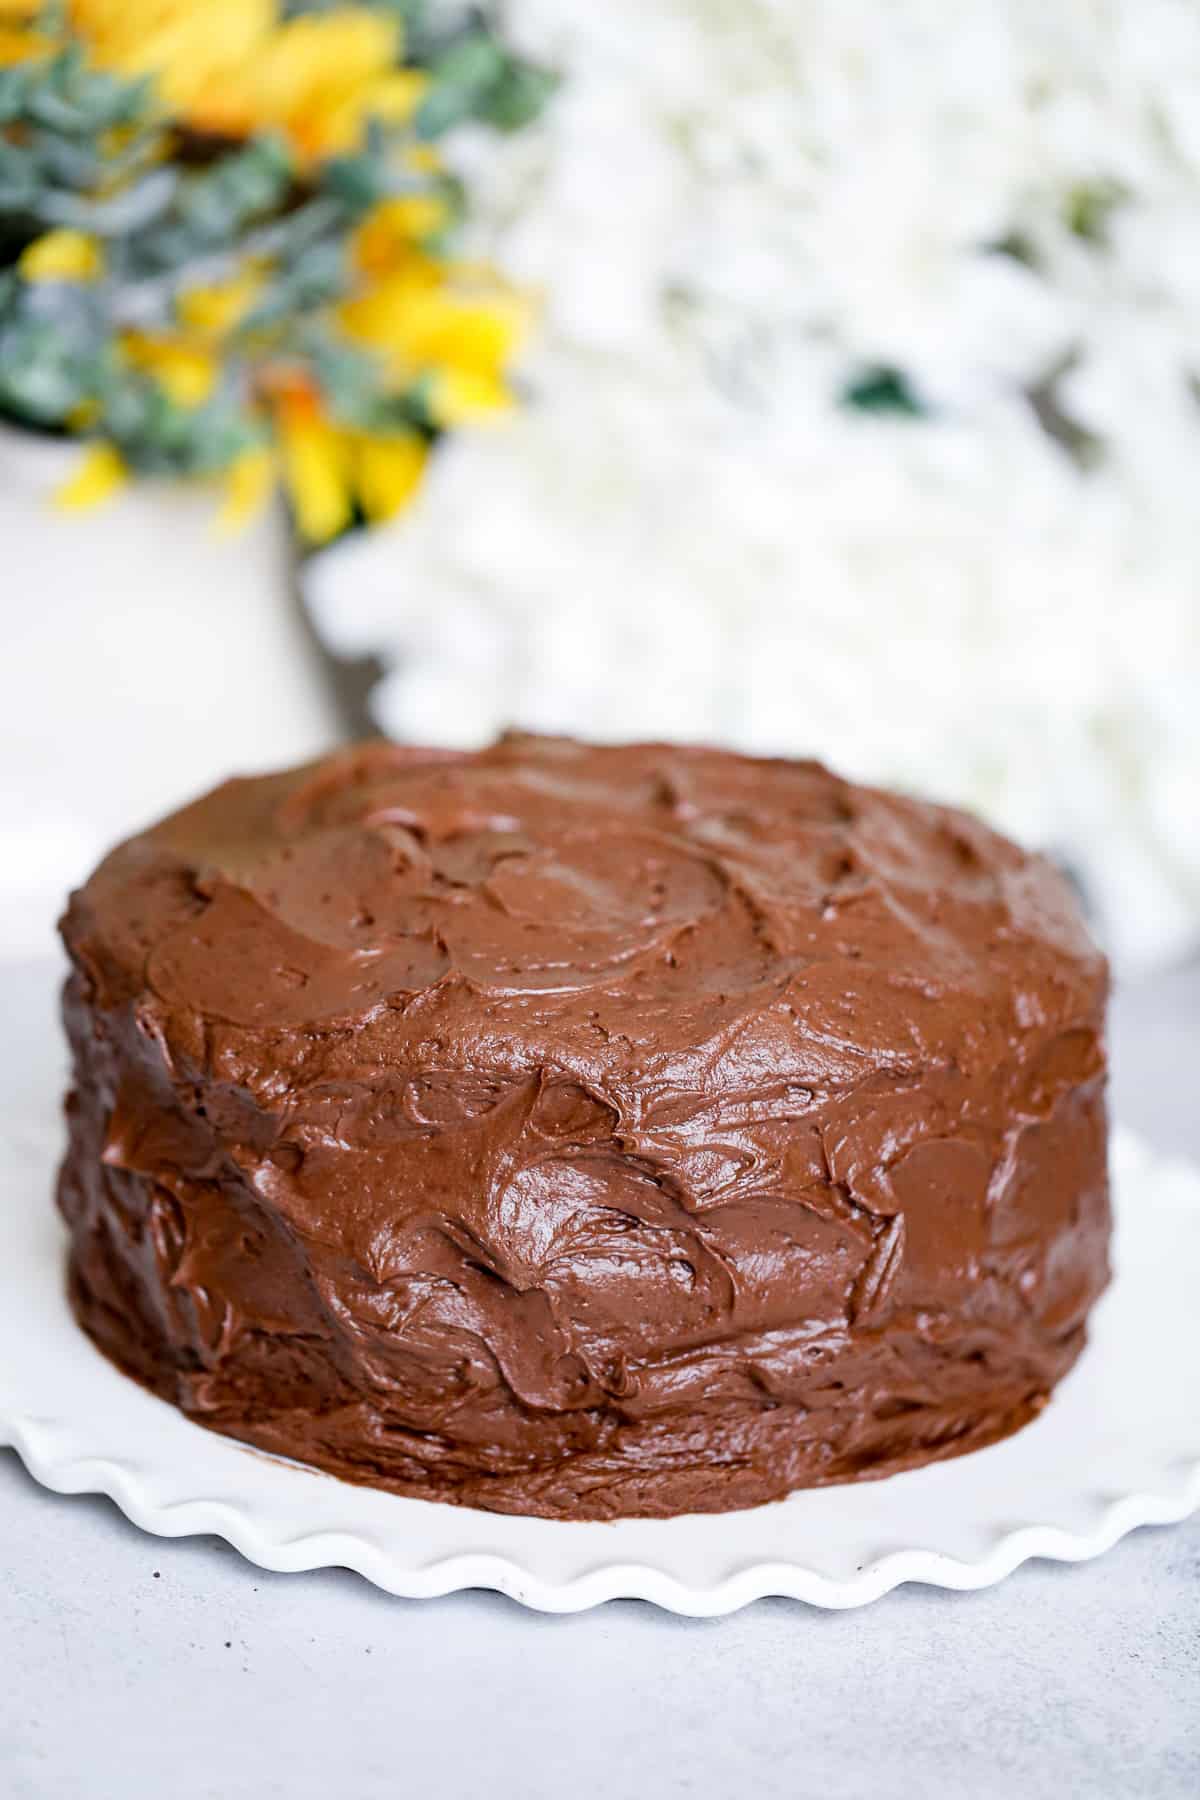 Super Easy Chocolate Cake Recipe with Super Easy Chocolate Frosting recipe